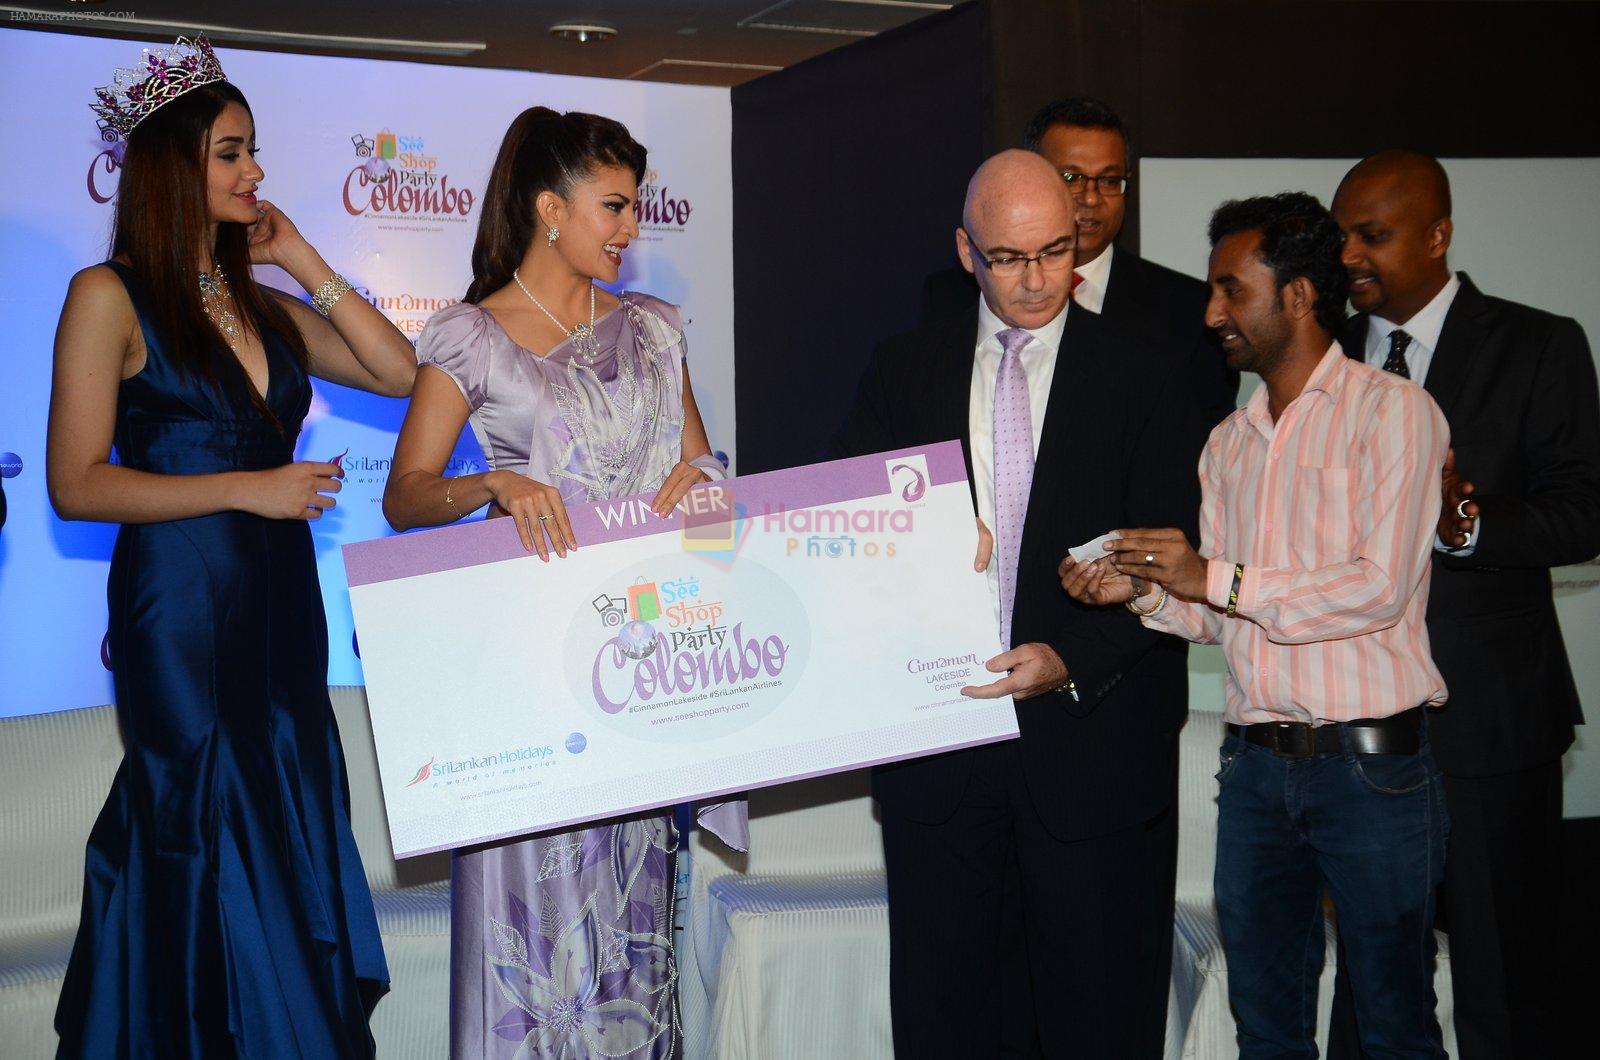 Jacqueline Fernandez at Cinnamon Hotel and Srilankan Airlines PC in Mumbai on 17th Feb 2016